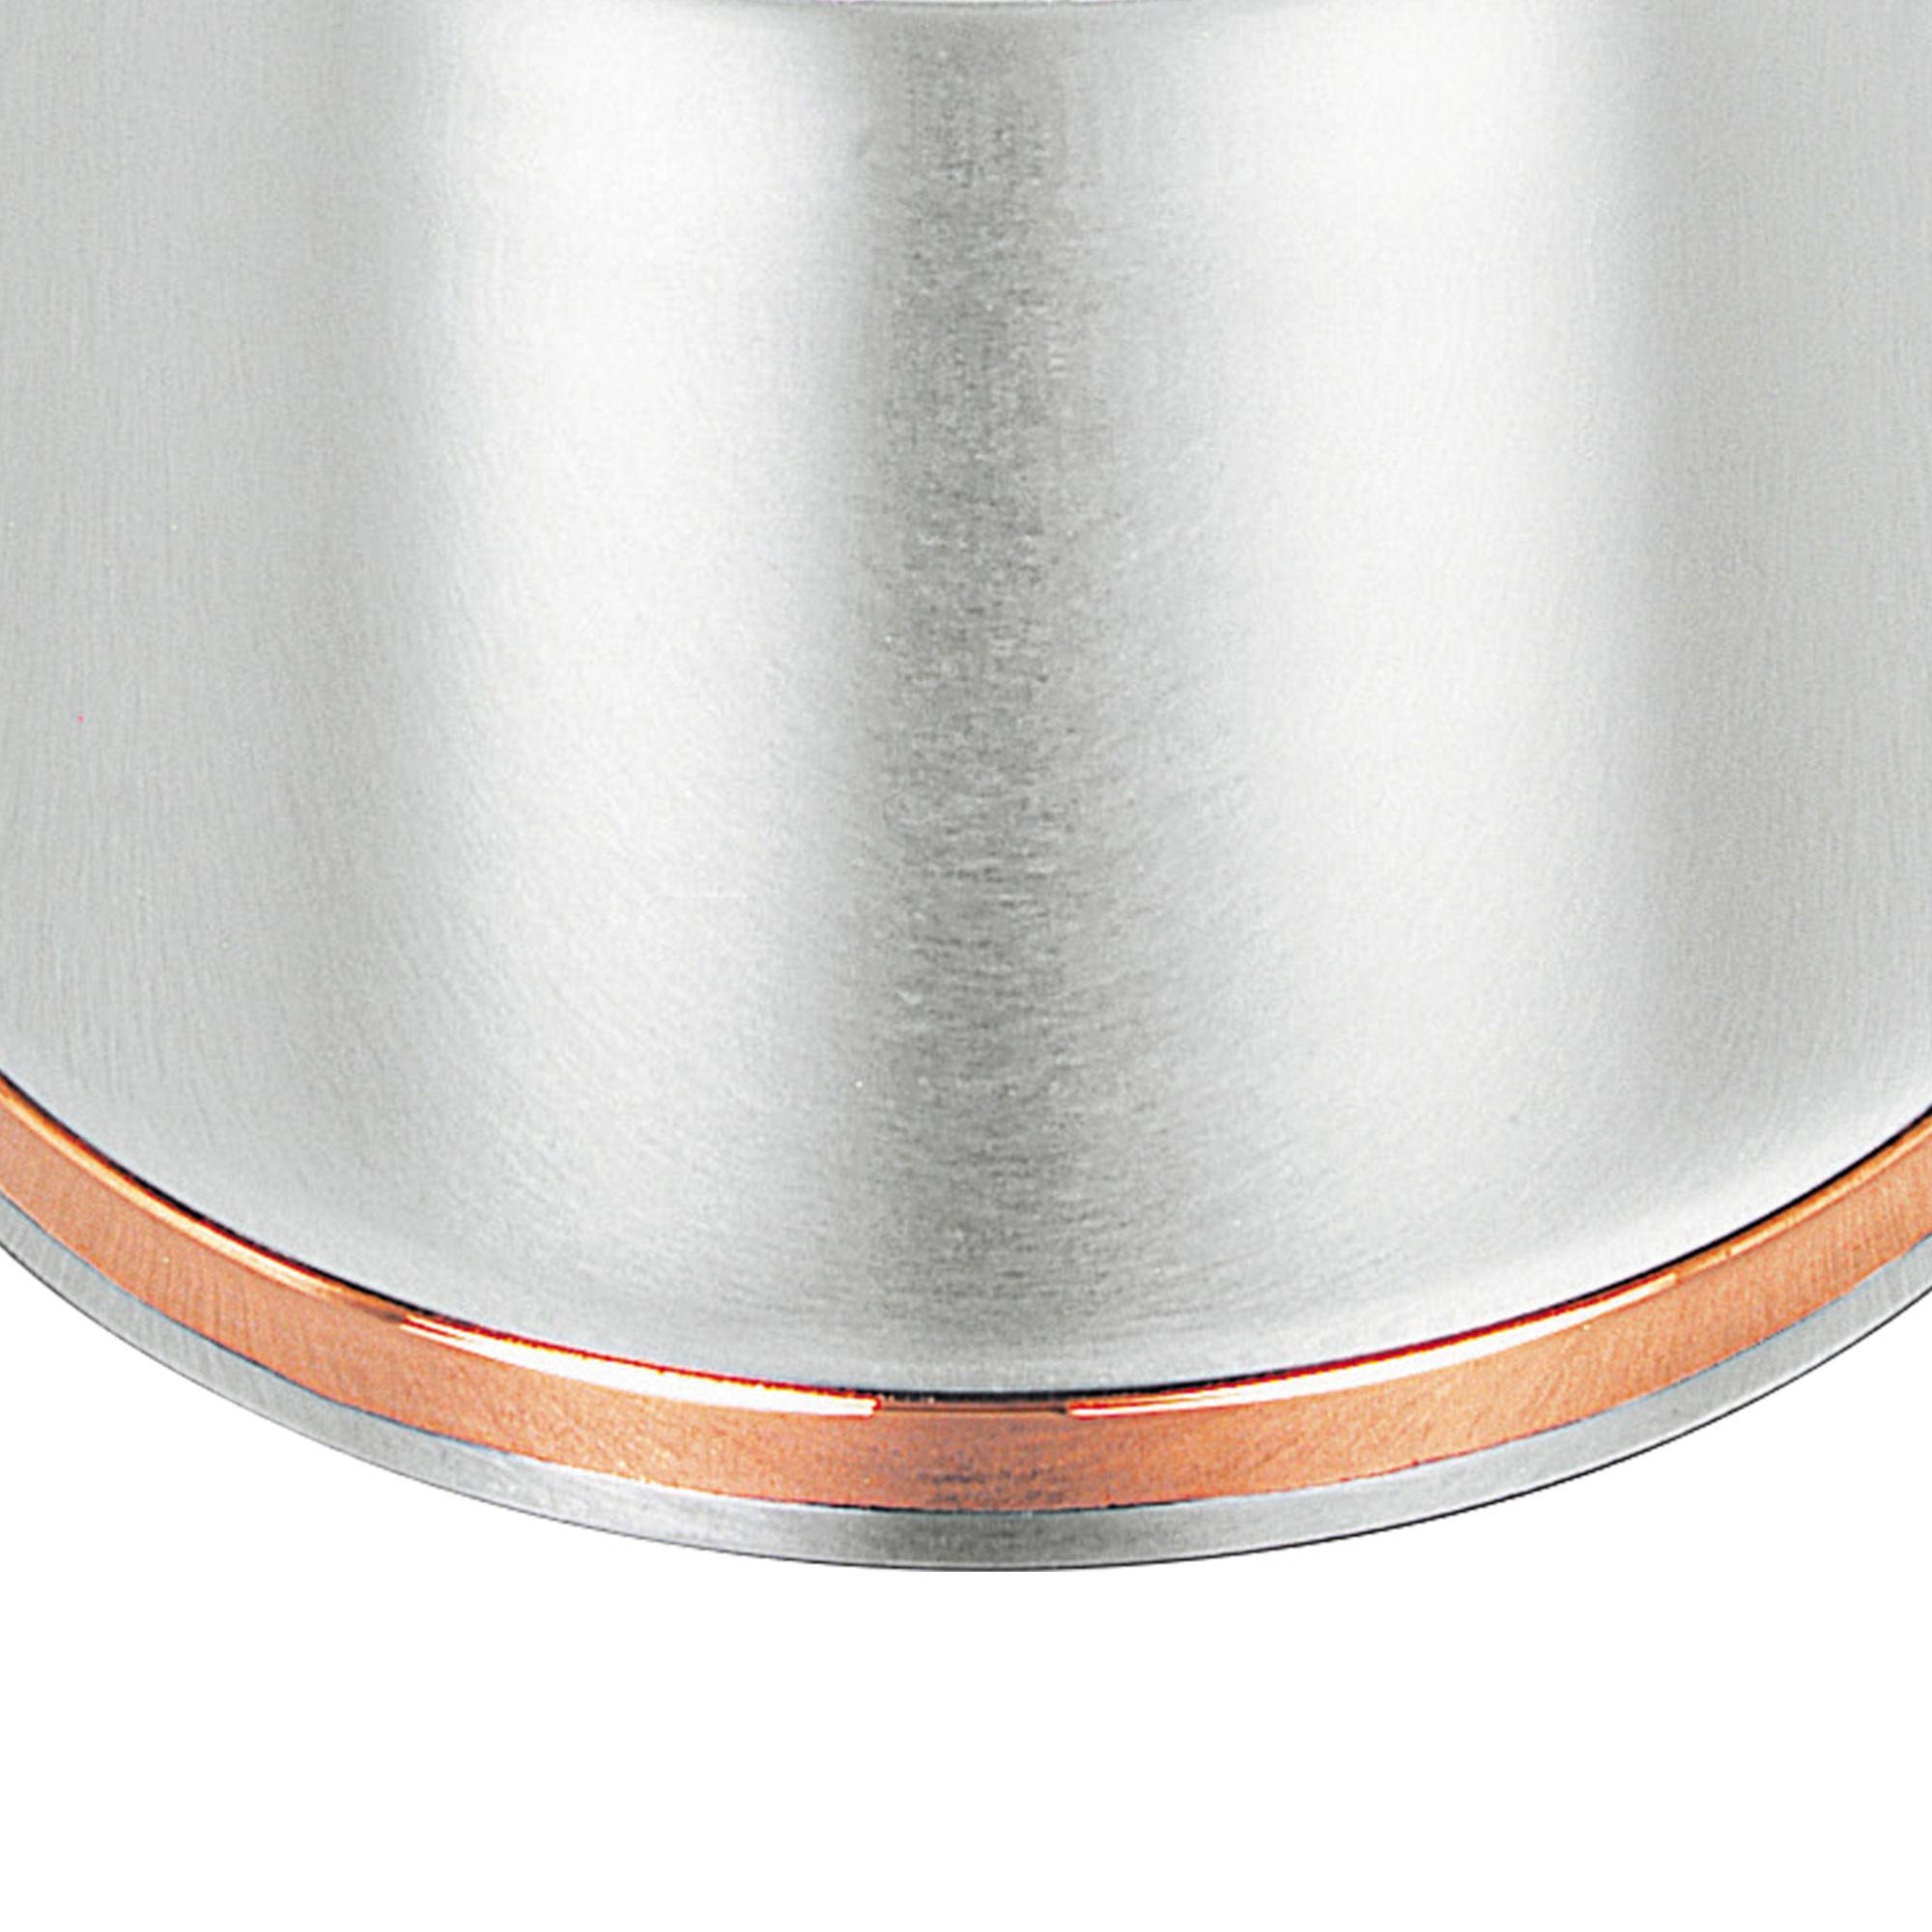 Scanpan Coppernox Stainless Steel Covered Saucepan 14cm - 1.2L Image 4